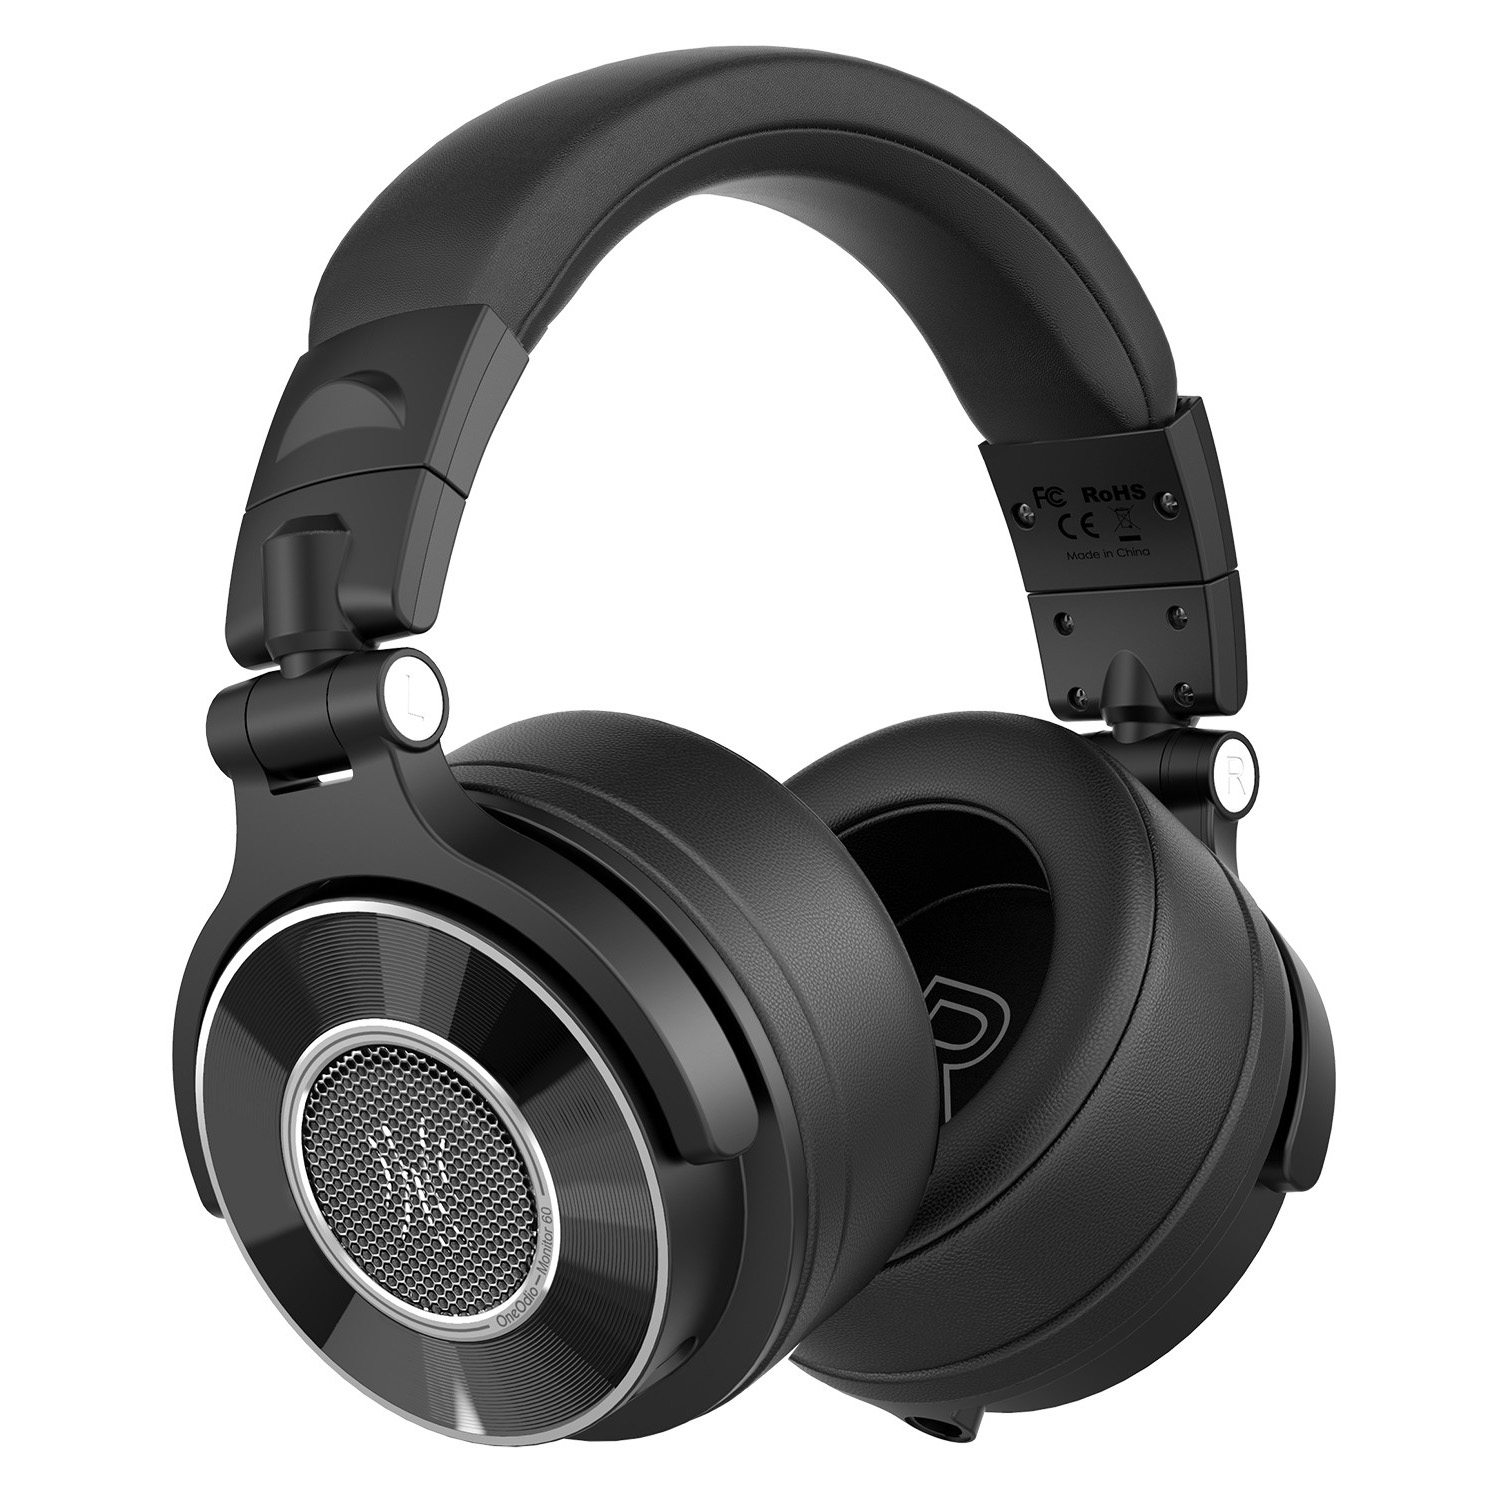 OneOdio Recording Studio Wired Over Ear Headphones Monitor 60 -Hi-Res Audio 6.35mm (1/4") Adapter-Black